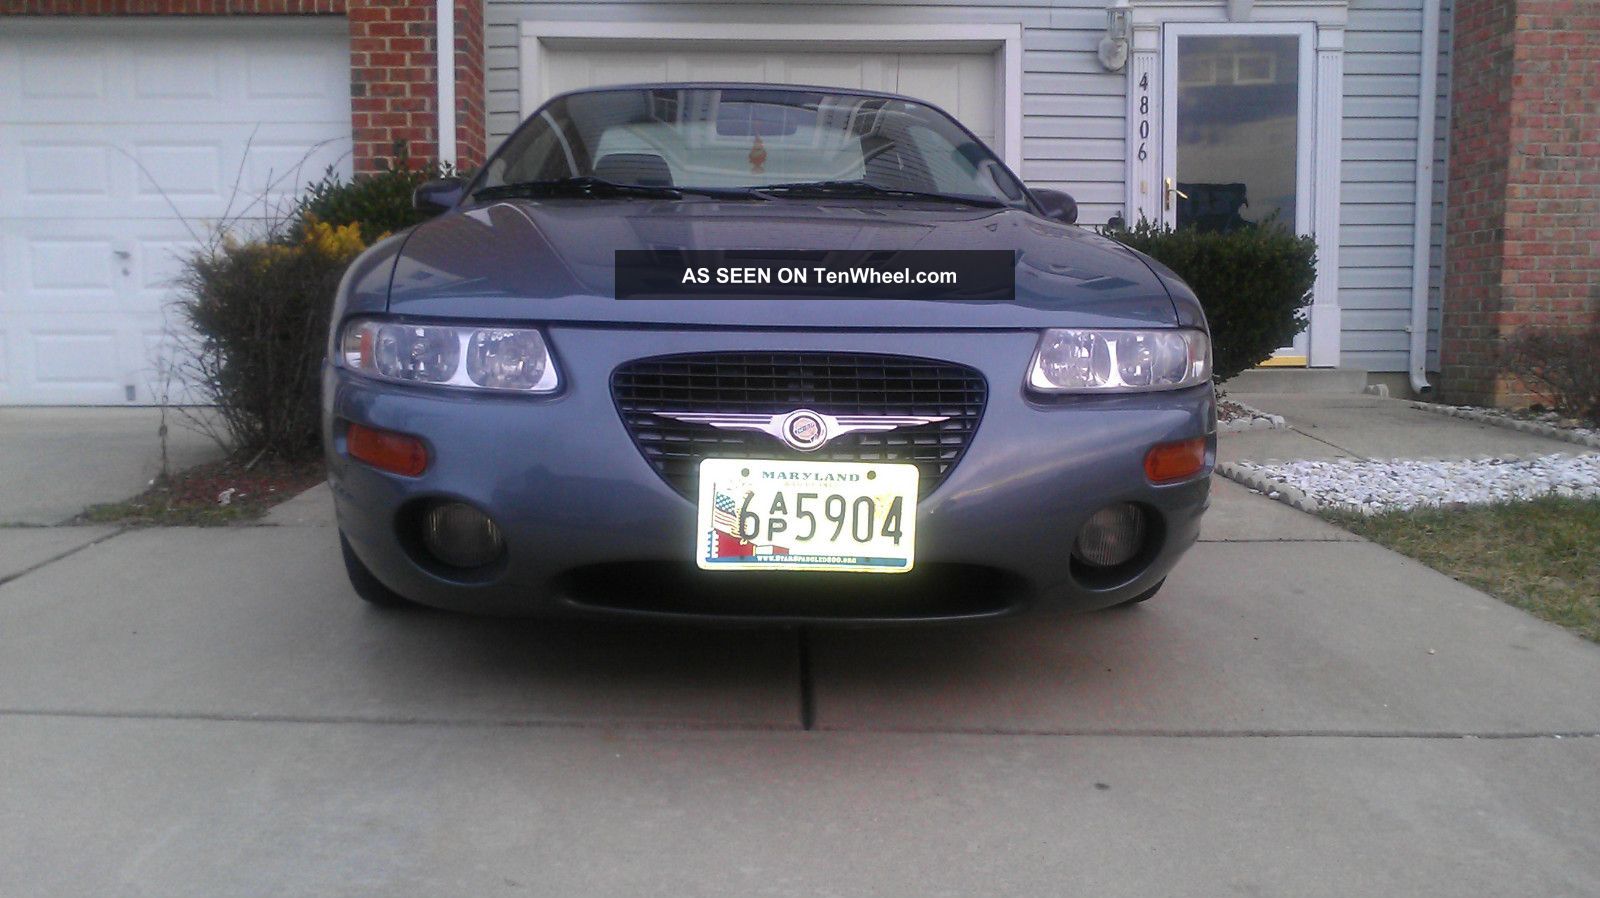 2000 Chrysler Sebring Lx Great & Fun Car To Drive - No Problems Or Issues Sebring photo